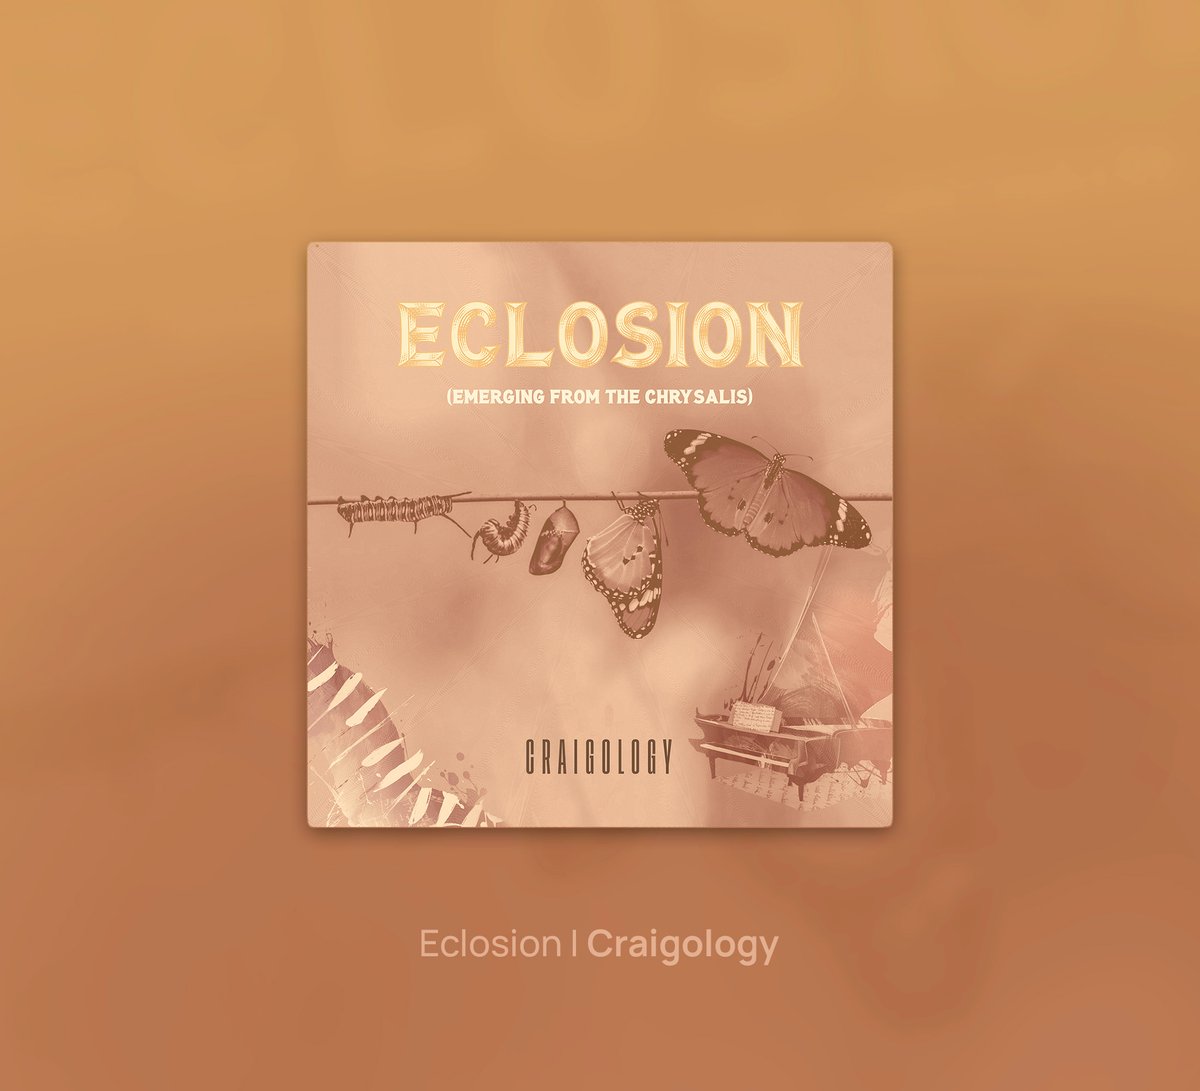 The Reveal is here! Check out my new single 'Eclosion (Emerging from the Chrysalis)' distributed by @DistroKid and live on Spotify! open.spotify.com/album/6DEeoxoo…